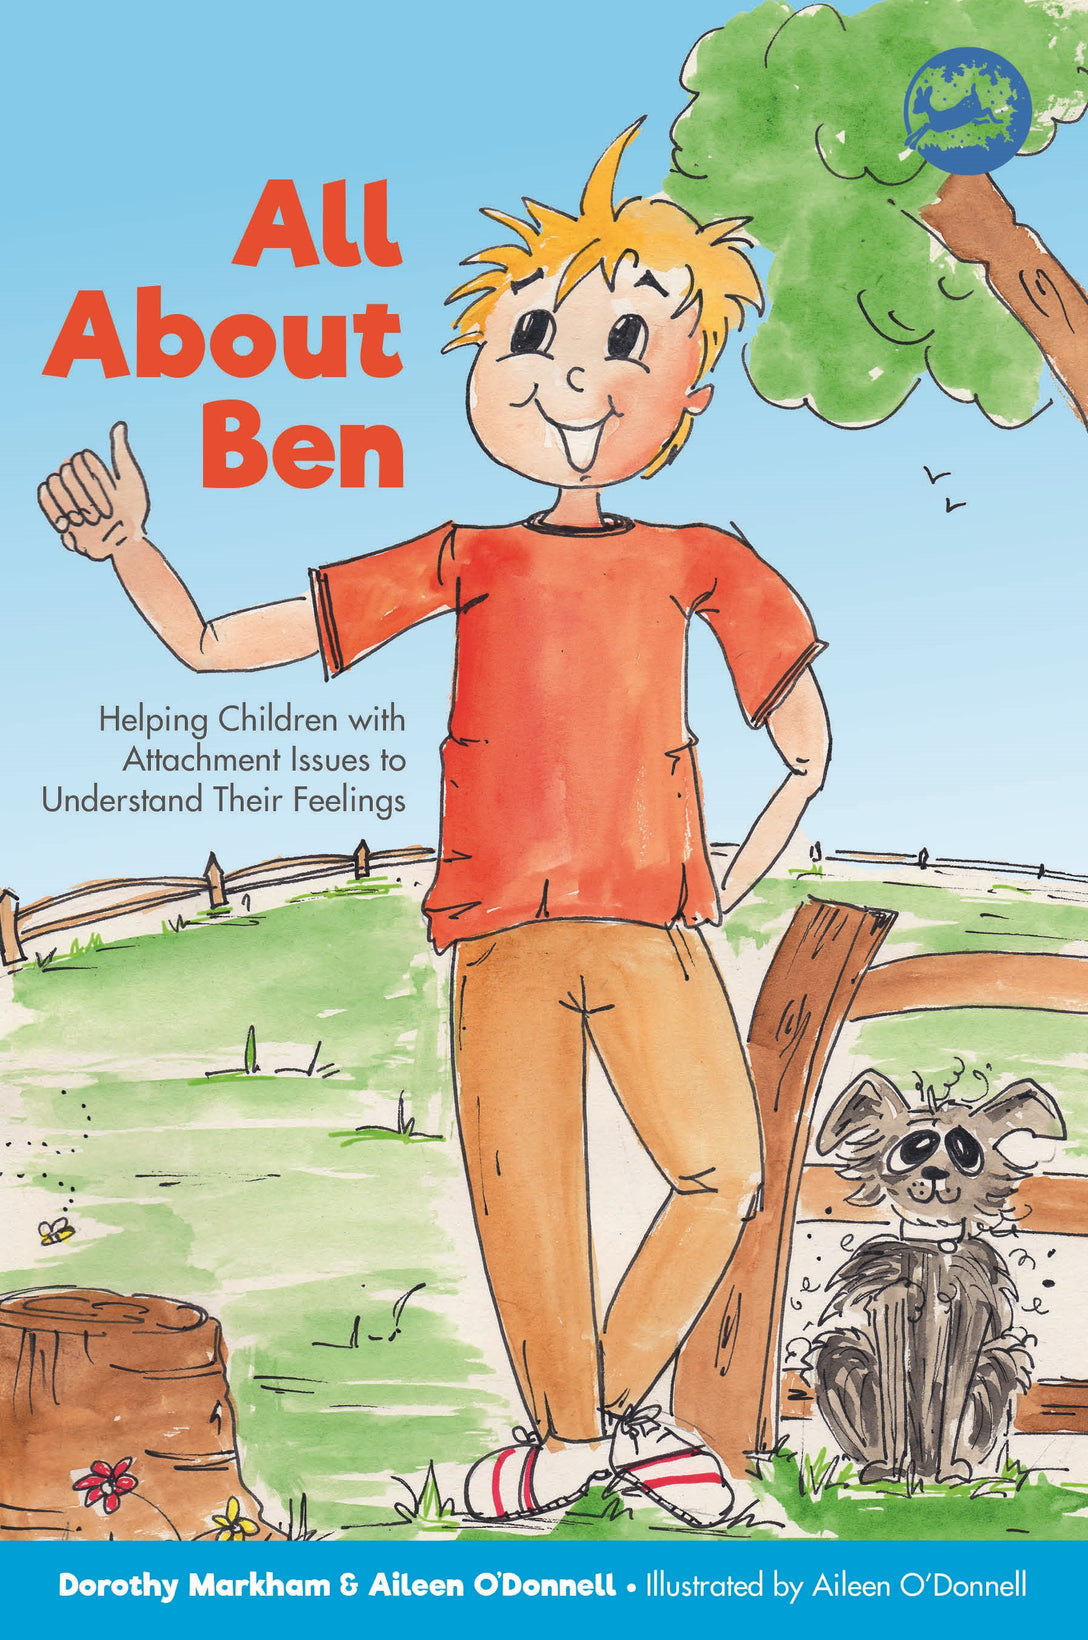 All About Ben by Dorothy Markham, Aileen O'Donnell, Aileen O'Donnell